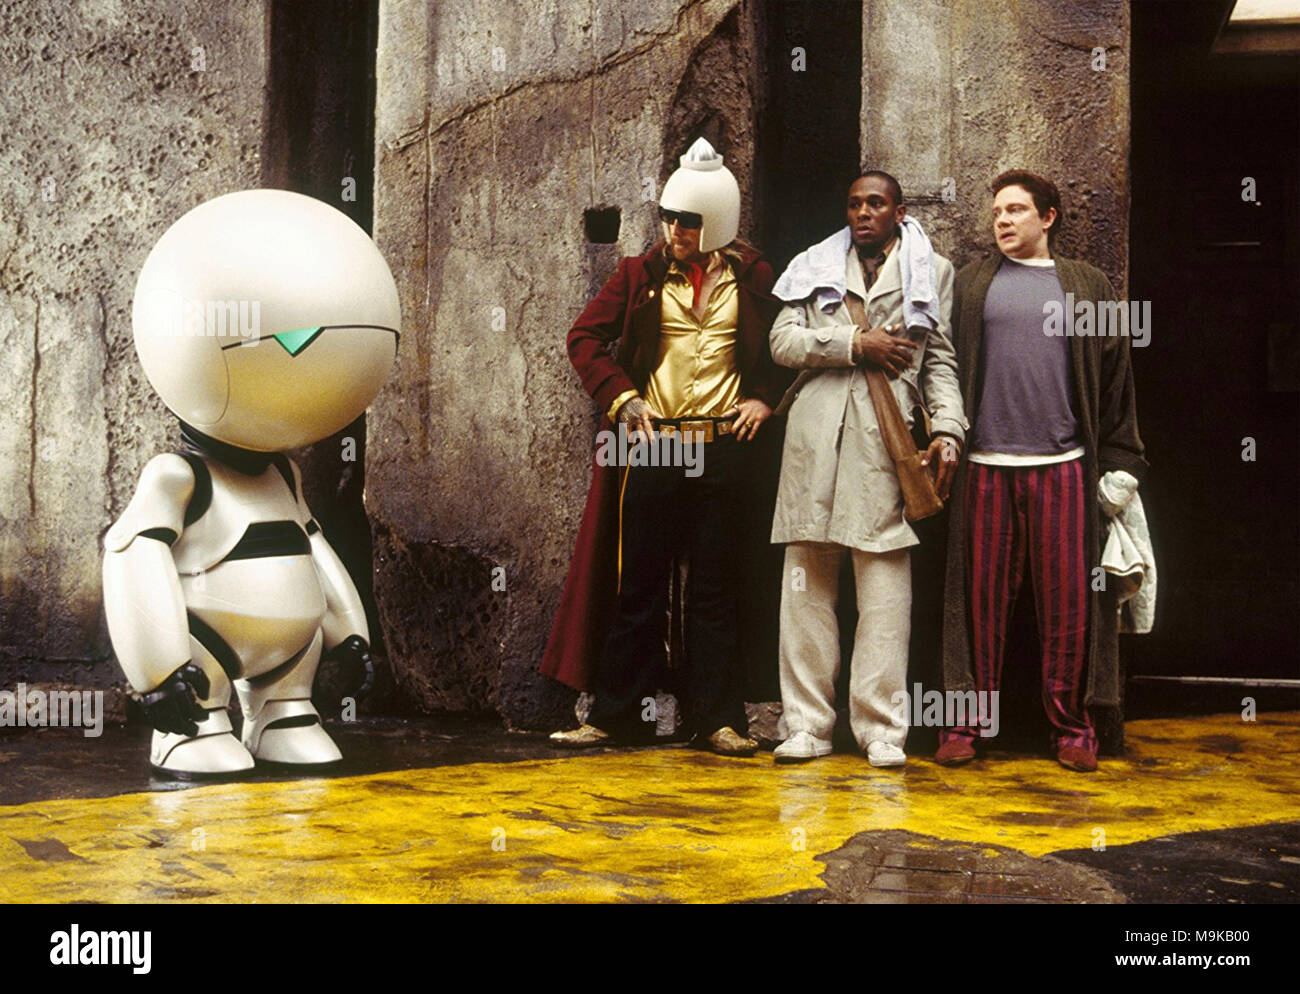 THE HITCHHIKER'S GUIDE TO THE GALAXY 2005 Touchstone Pictures film with from left: Warwick Davis (Marvin the robot), Sam Rockwell (Zaphod Beeblebrox), Mos Def (Ford Prefect), Martin Freeman (Arthur Dent) Stock Photo